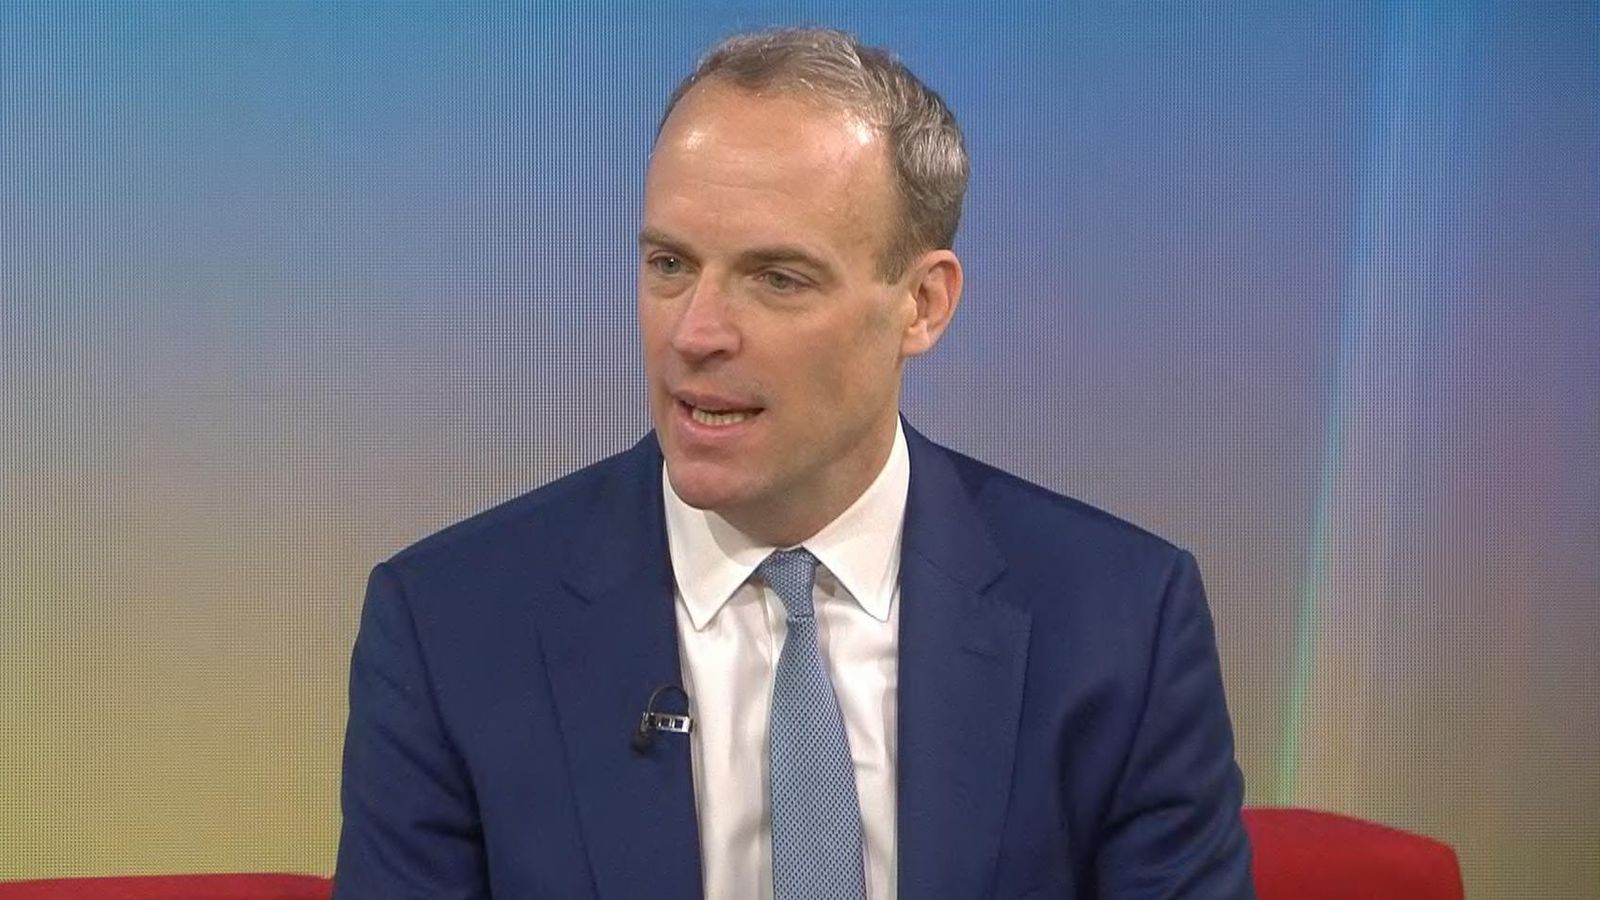 Dominic Raab plans to change law to compel 'spineless criminals' to attend their sentencing after Thomas Cashman snub